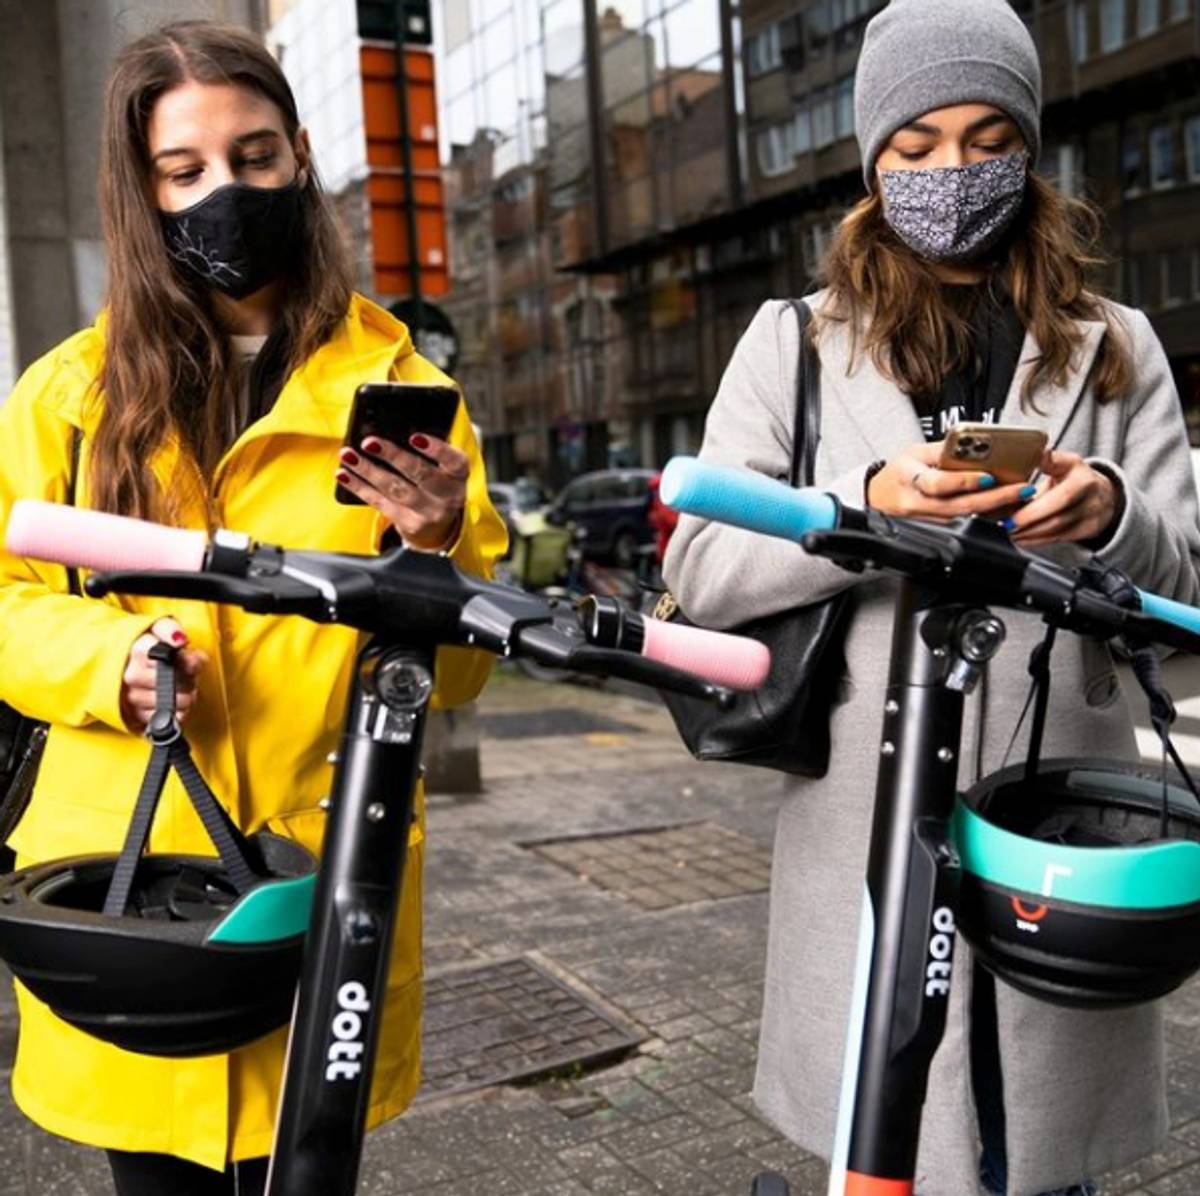 Dott aims for sustainability minded e-scooter riders